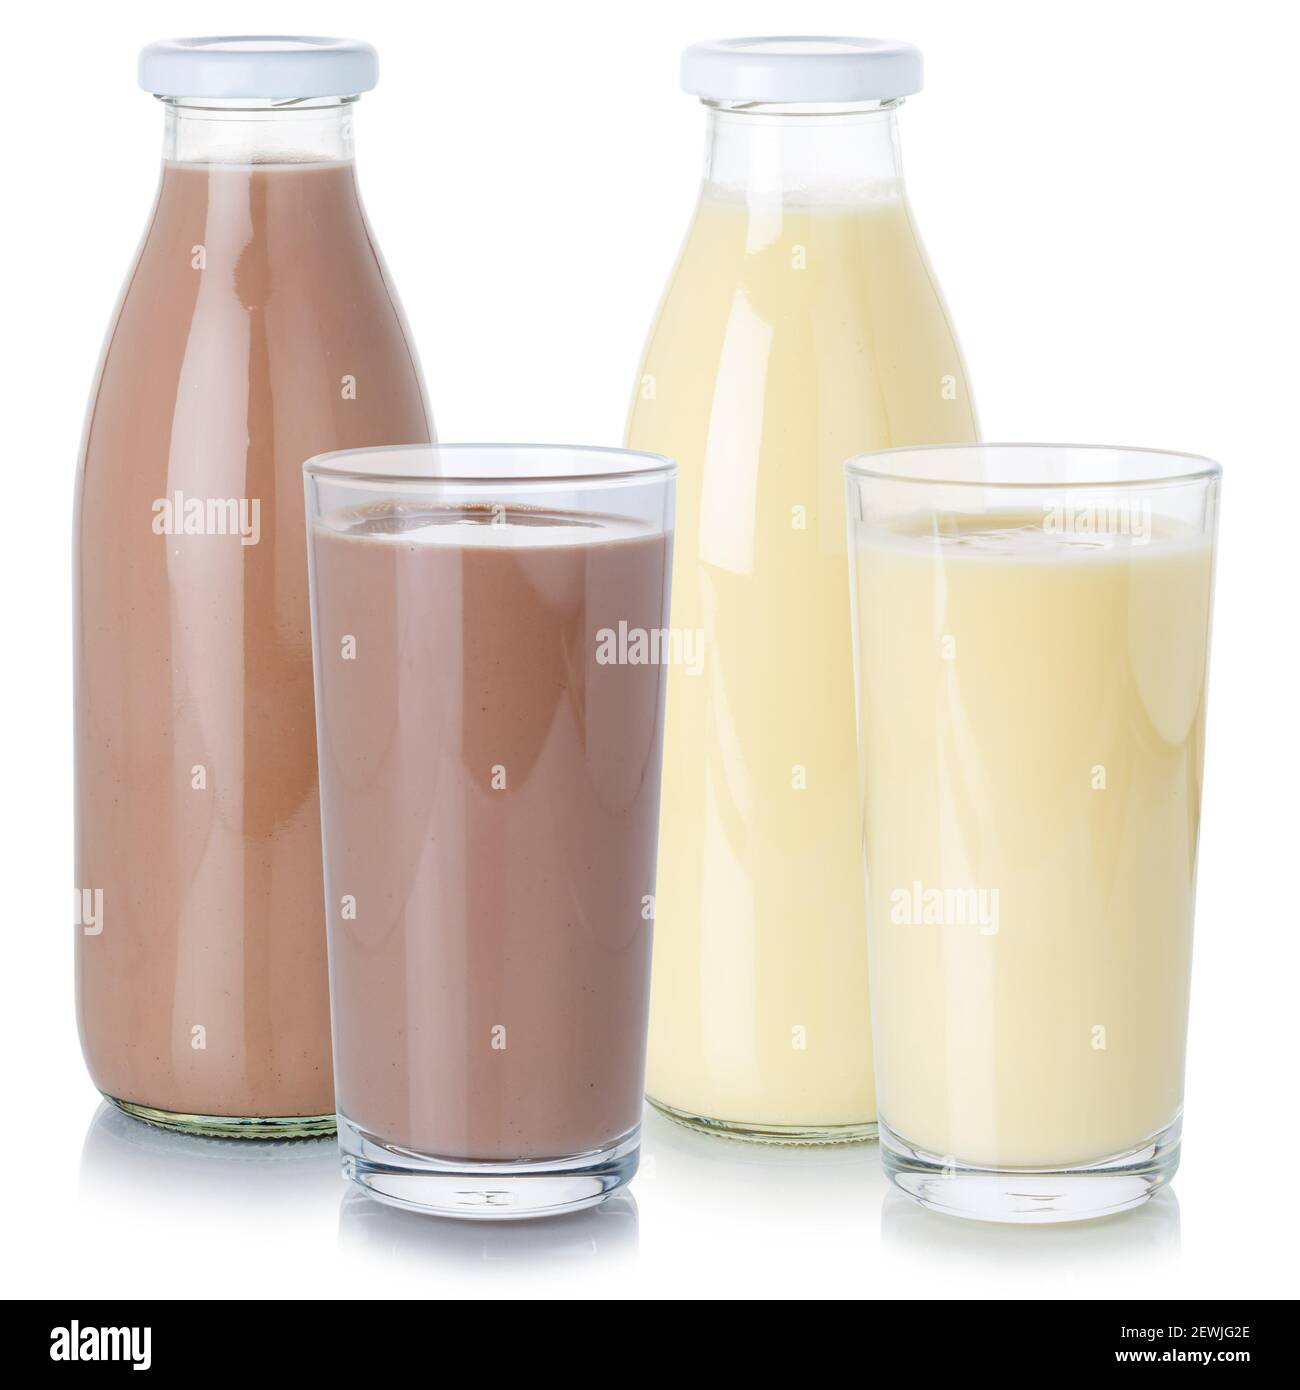 Milk drink chocolate milkshake shake in a bottle and glass isolated on a white background. Stock Photo